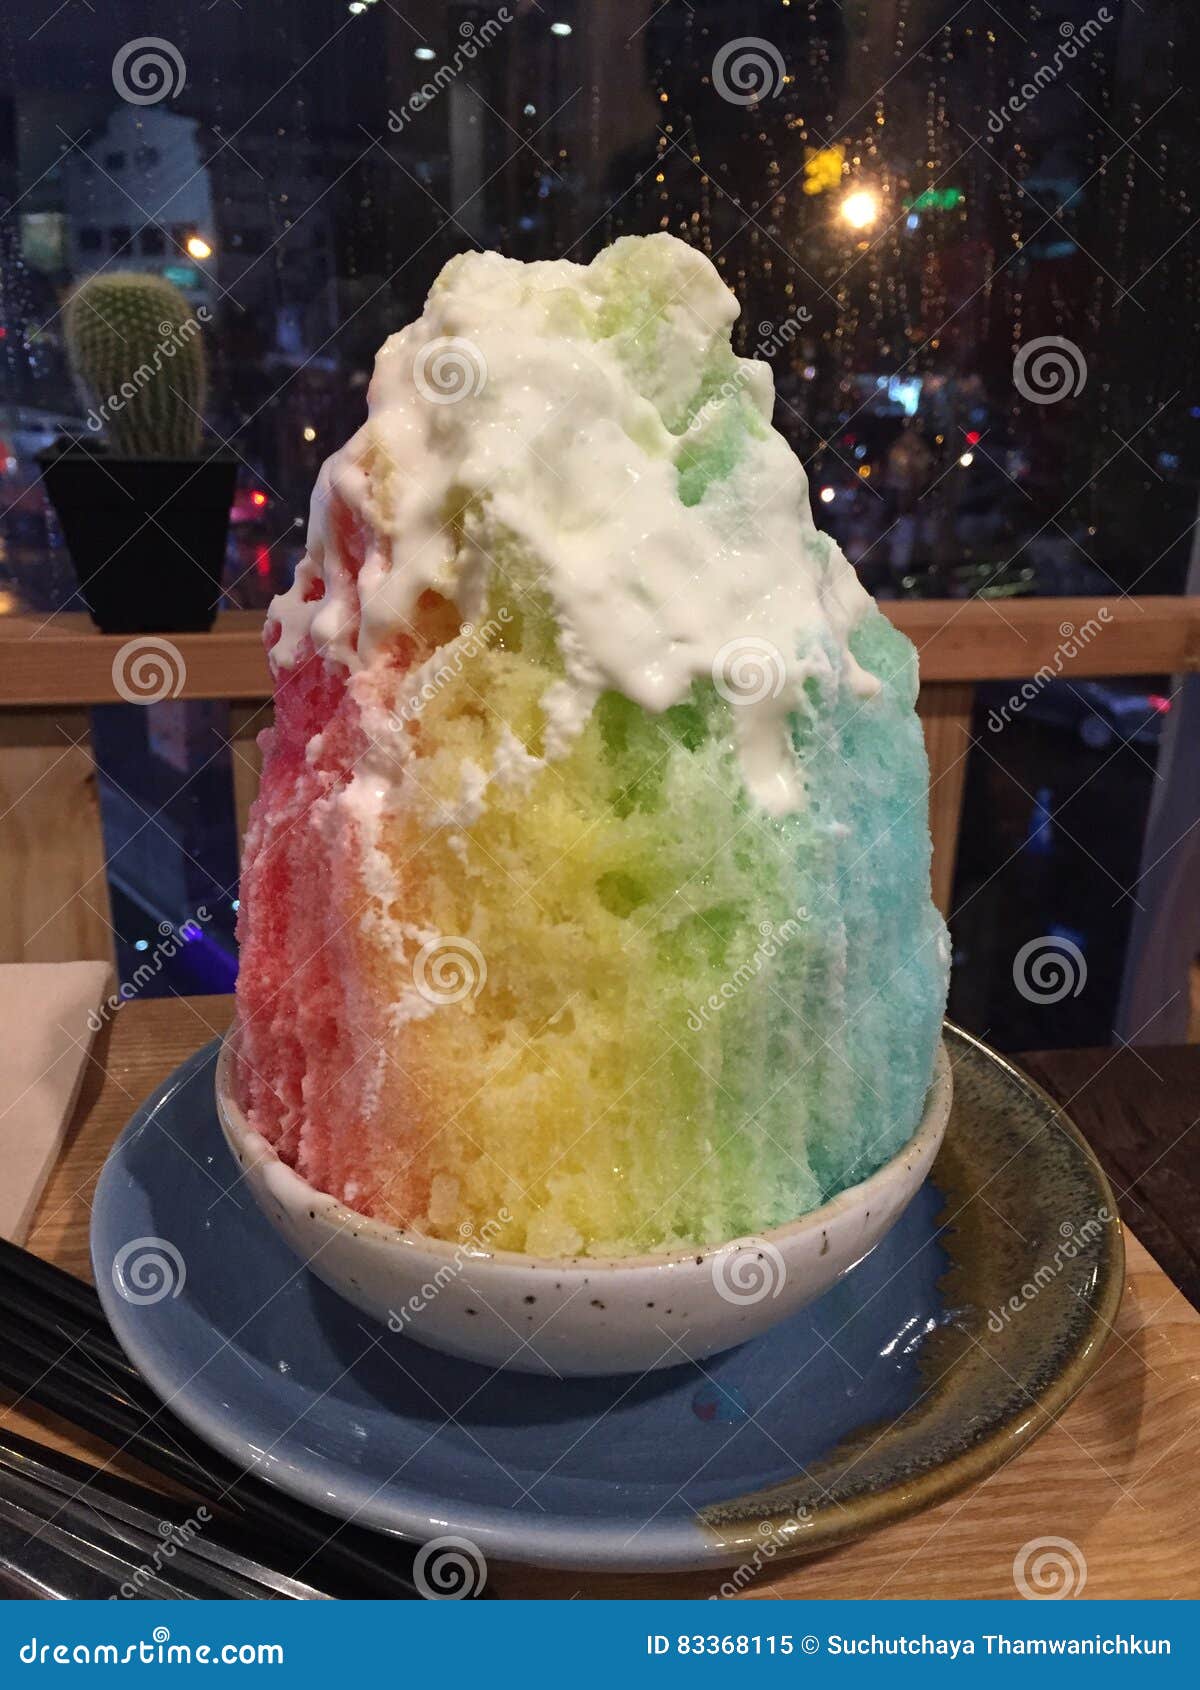 Japanese Shaved Ice, Colorful Rainbow Syrup Kakigori Top With Condensed ...